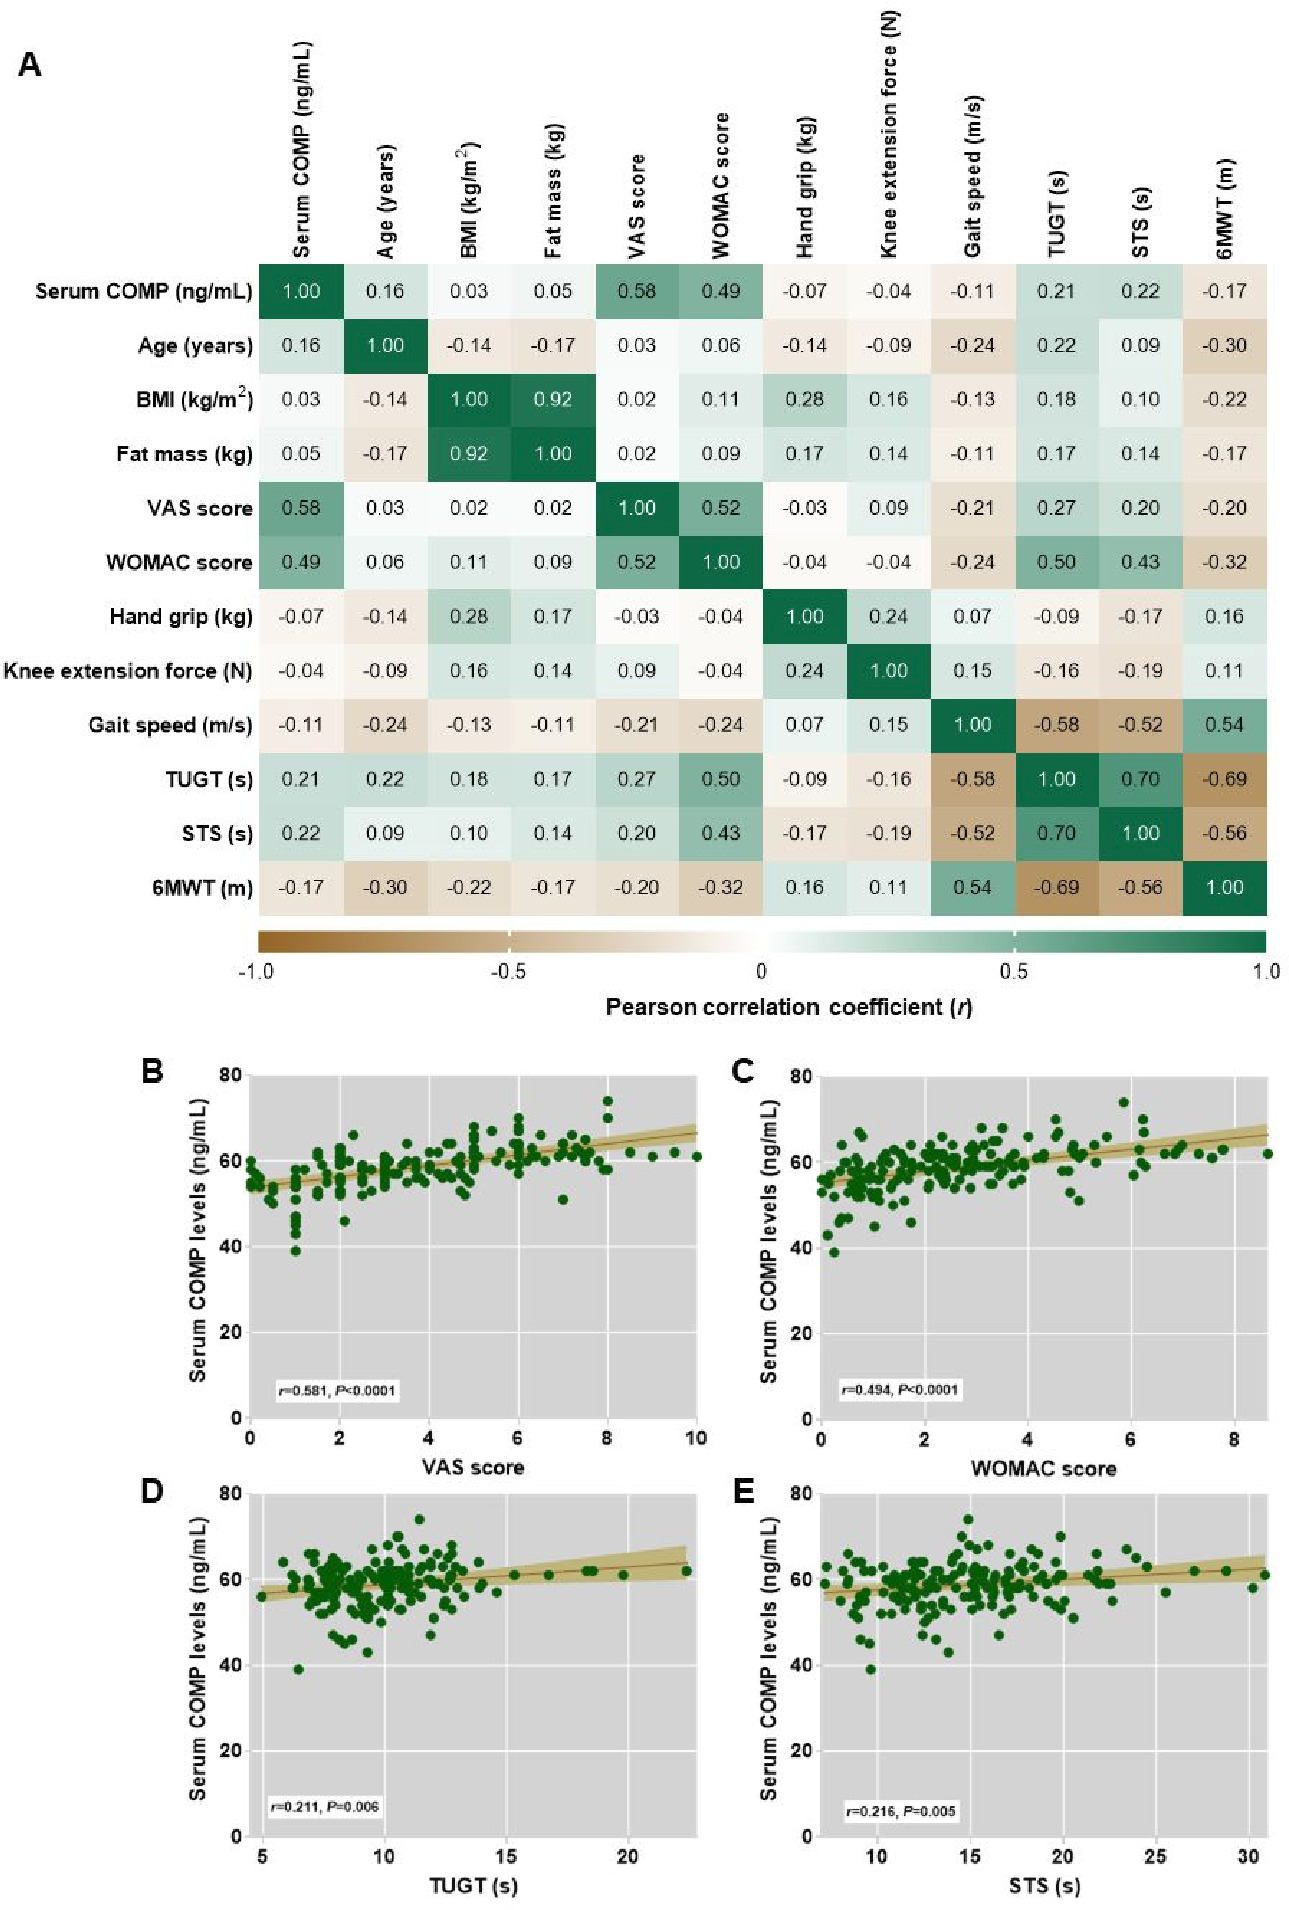 Fig. 2 
            Cartilage oligomeric matrix protein (COMP) association with outcome parameters of knee osteoarthritis (OA) patients. a) A heatmap of Pearson correlation matrix between serum COMP and clinical parameters of knee OA patients. b) Scatter plot displaying a strong positive correlation between serum COMP and knee pain (visual analogue scale (VAS) score) in knee OA patients. c) Scatter plot displaying a strong positive correlation between serum COMP and physical disability (Western Ontario and MacMaster Universities Osteoarthritis Index (WOMAC) score) in knee OA patients. d) Scatter plot displaying a weak positive correlation between serum COMP and Timed Up and Go test (TUGT) in knee OA patients. e) Scatter plot displaying a weak positive correlation between serum COMP and sit-to-stand (STS) in knee OA patients. 6MWT, distance walked in six minutes.
          